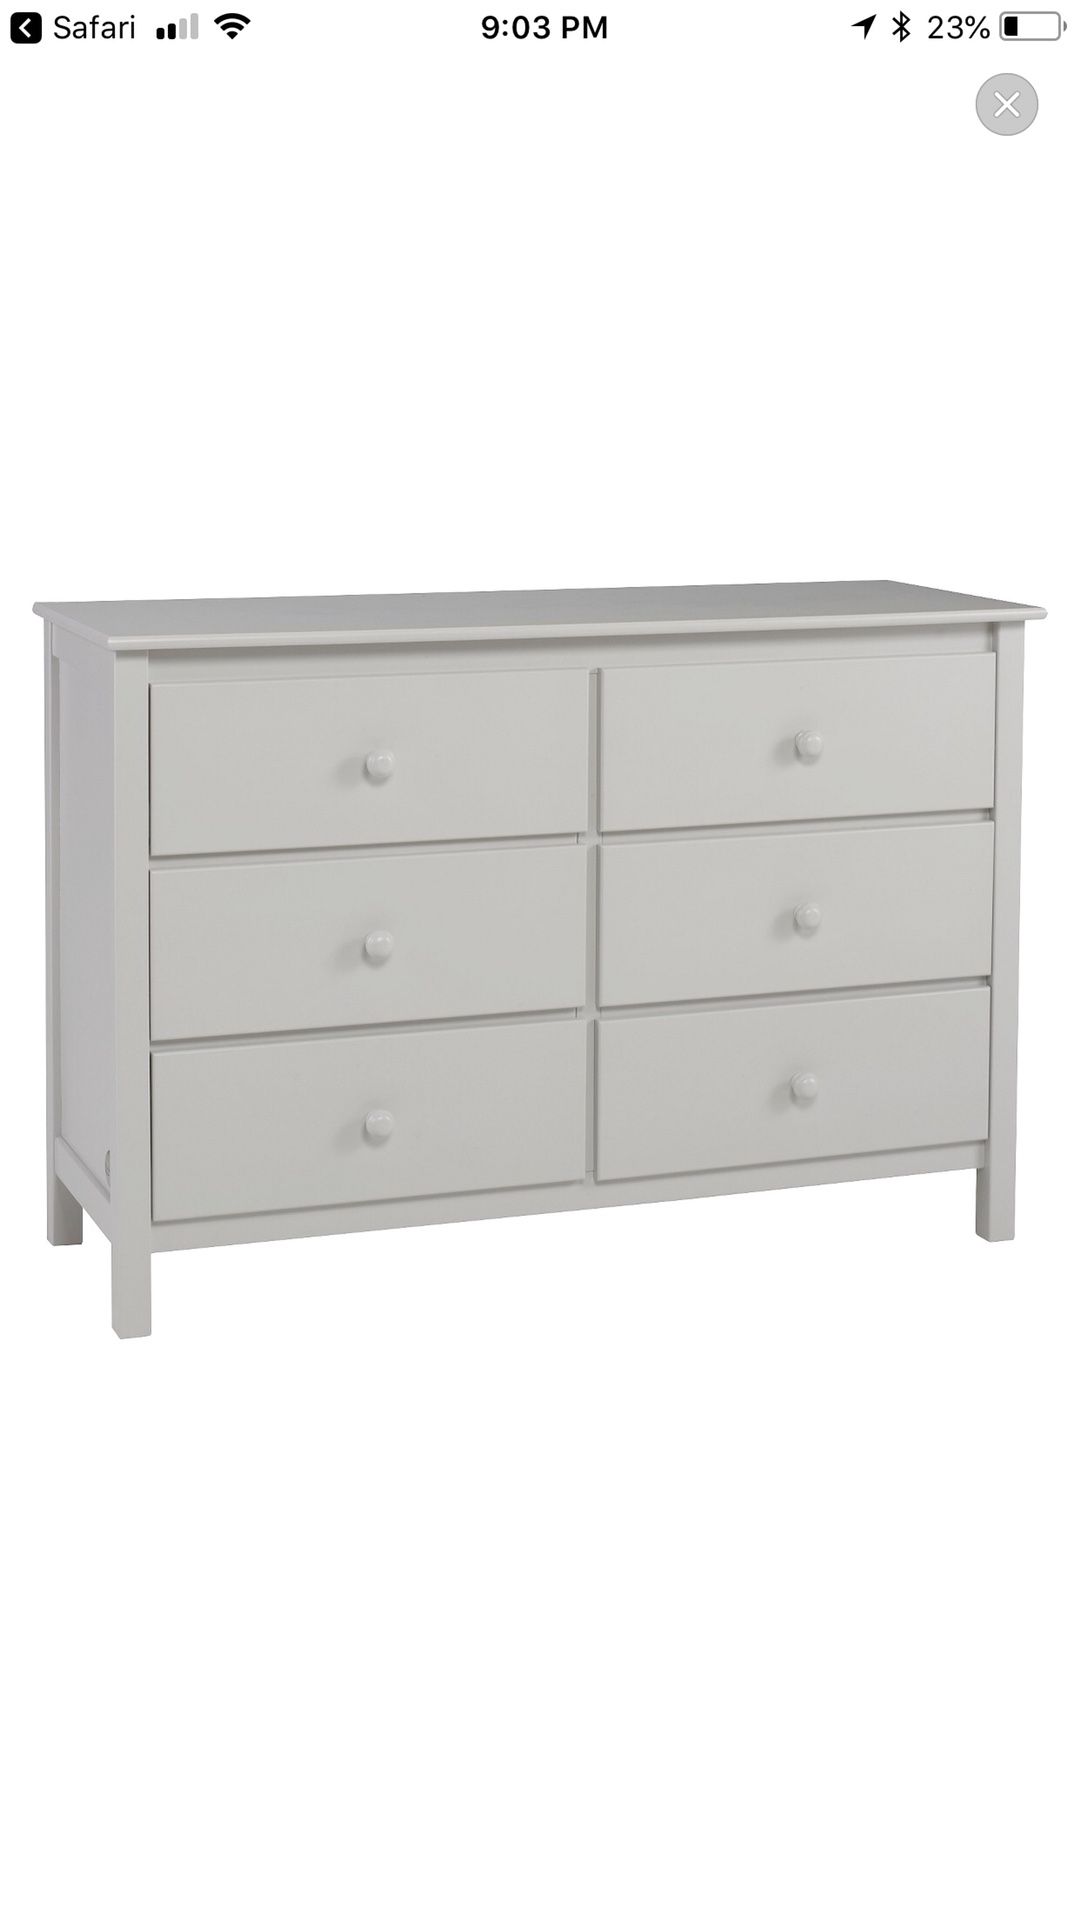 Misty gray crib, changing table and dresser